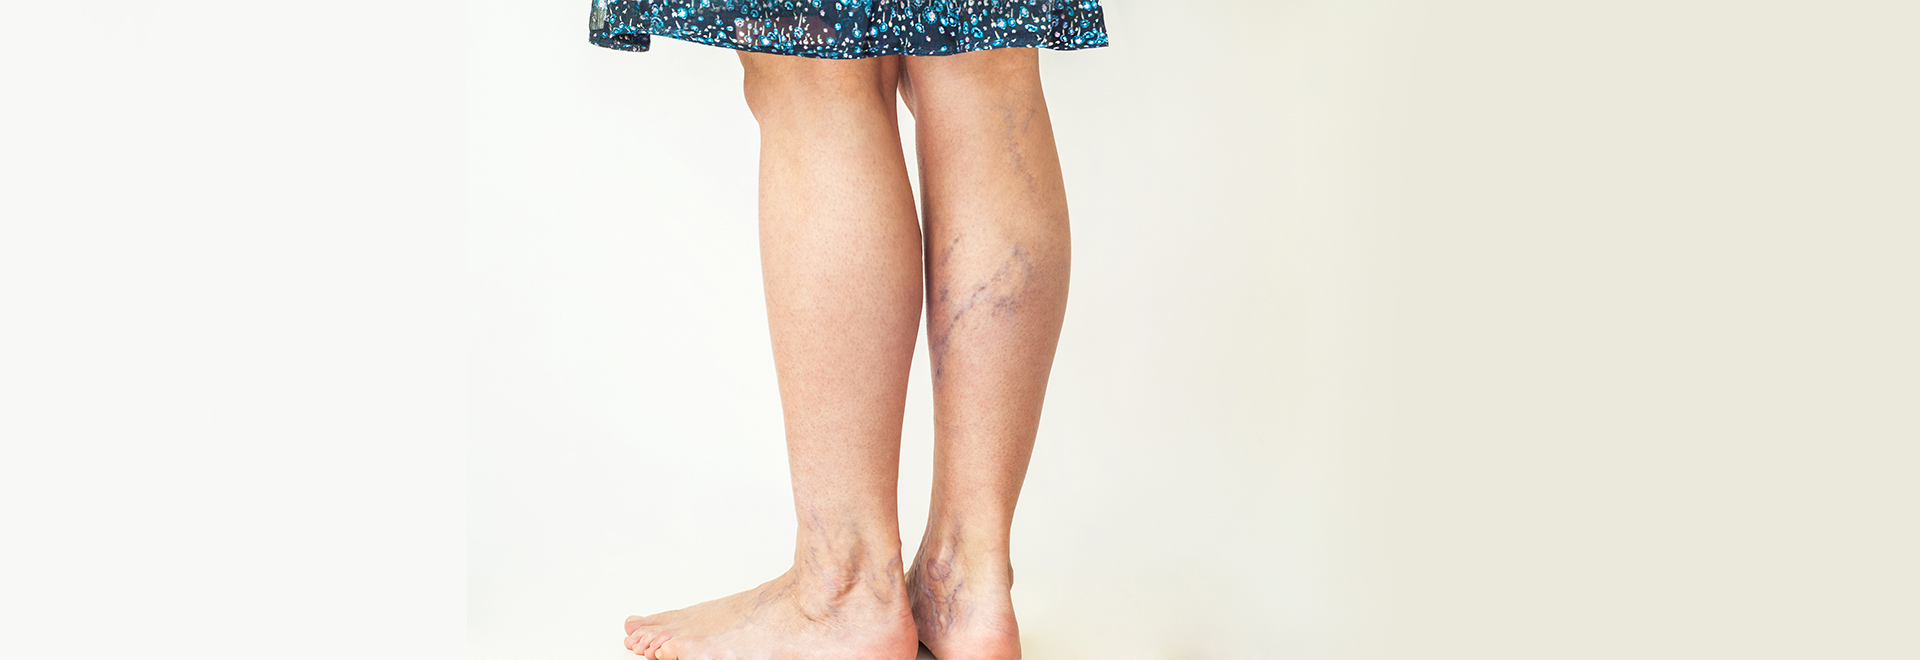 varicose-veins-causes-symptoms-treatment-and-prevention